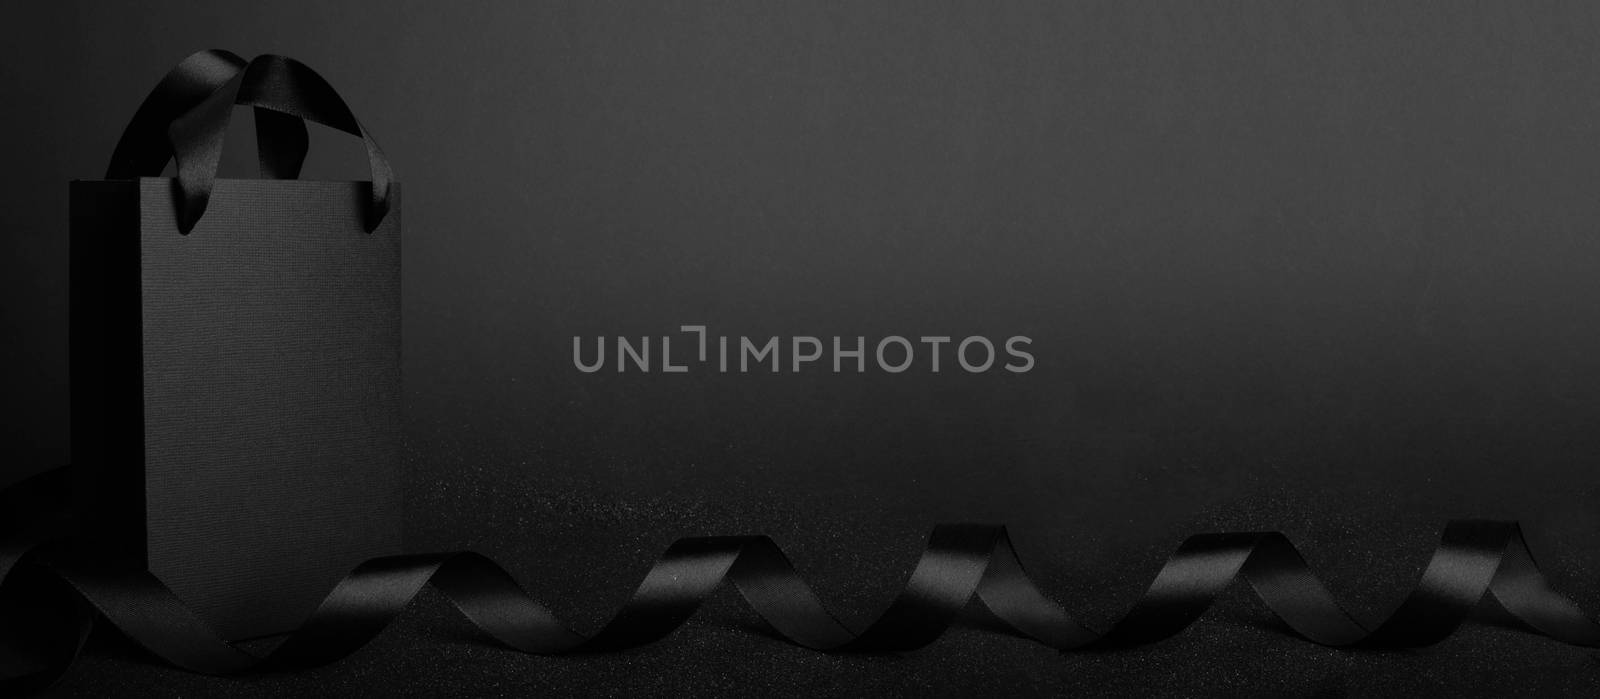 Black Friday blank empty paper bag with copy space for text and logo on dark background sale concept banner backgrounds